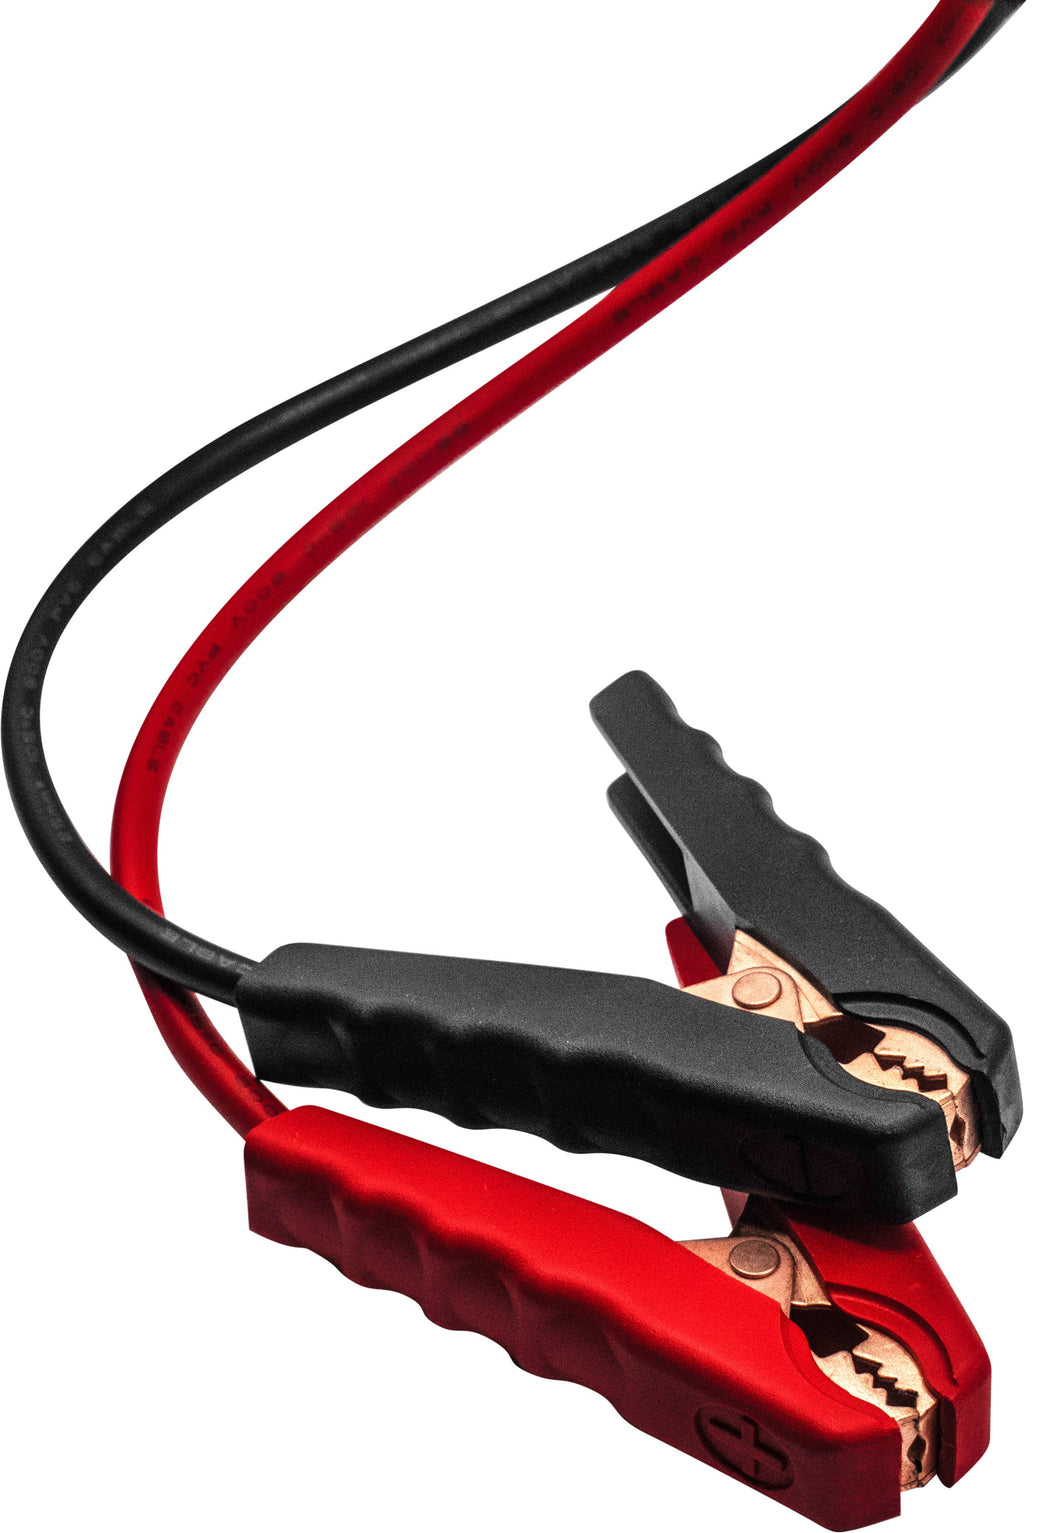 BOXO 5 Meter Cable for Flash Charger Support Unit - Both Models Available | Boxo UK